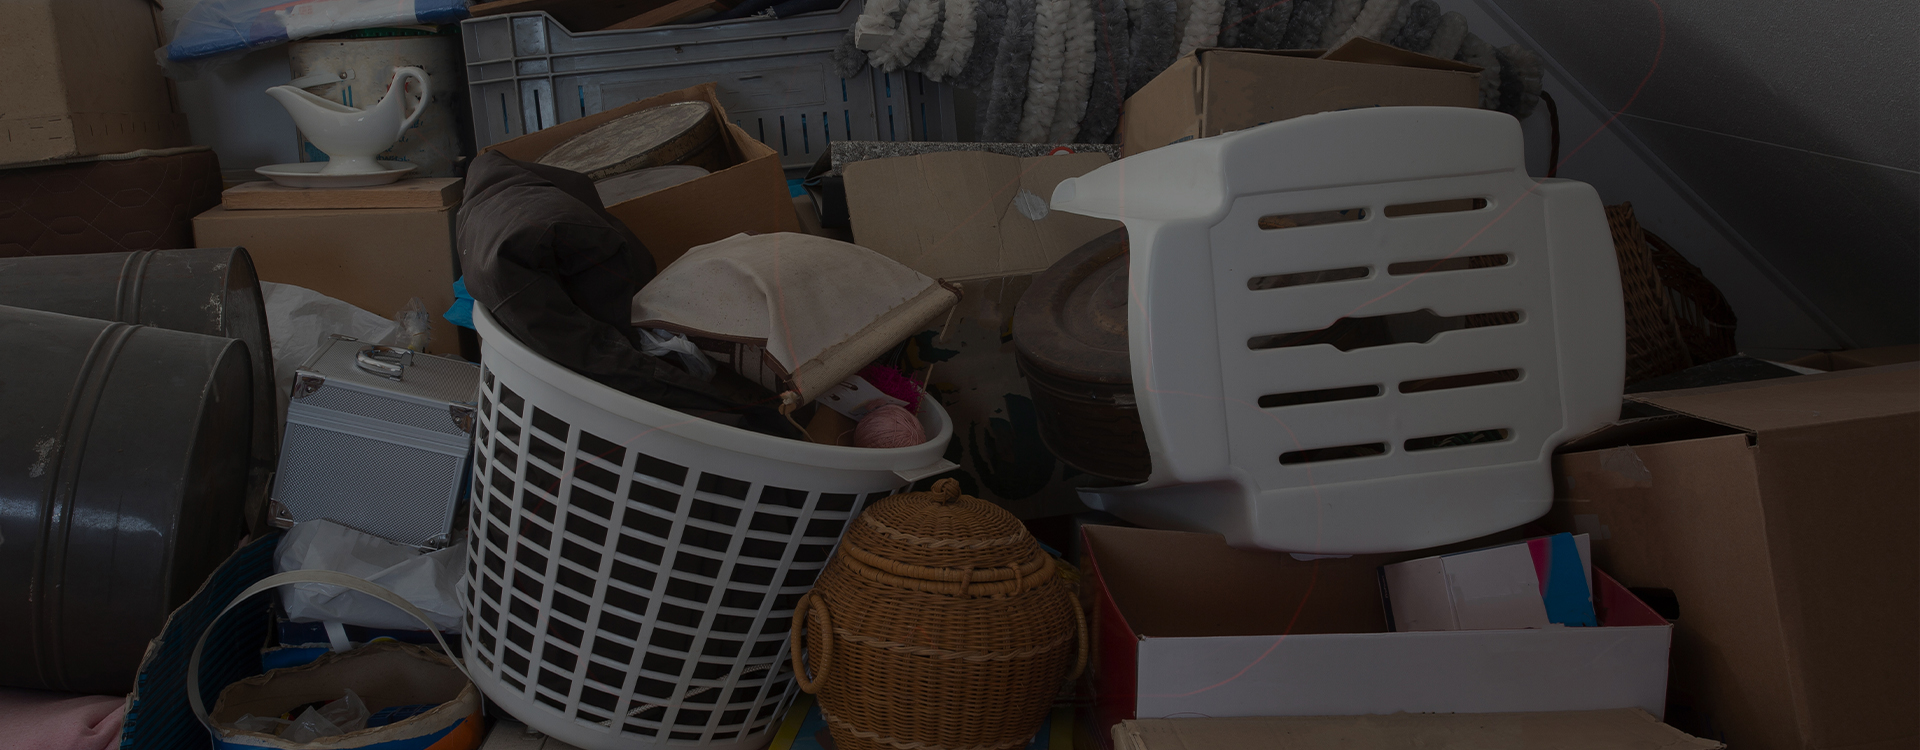 Affordable Commercial and Residential Junk Removal Services